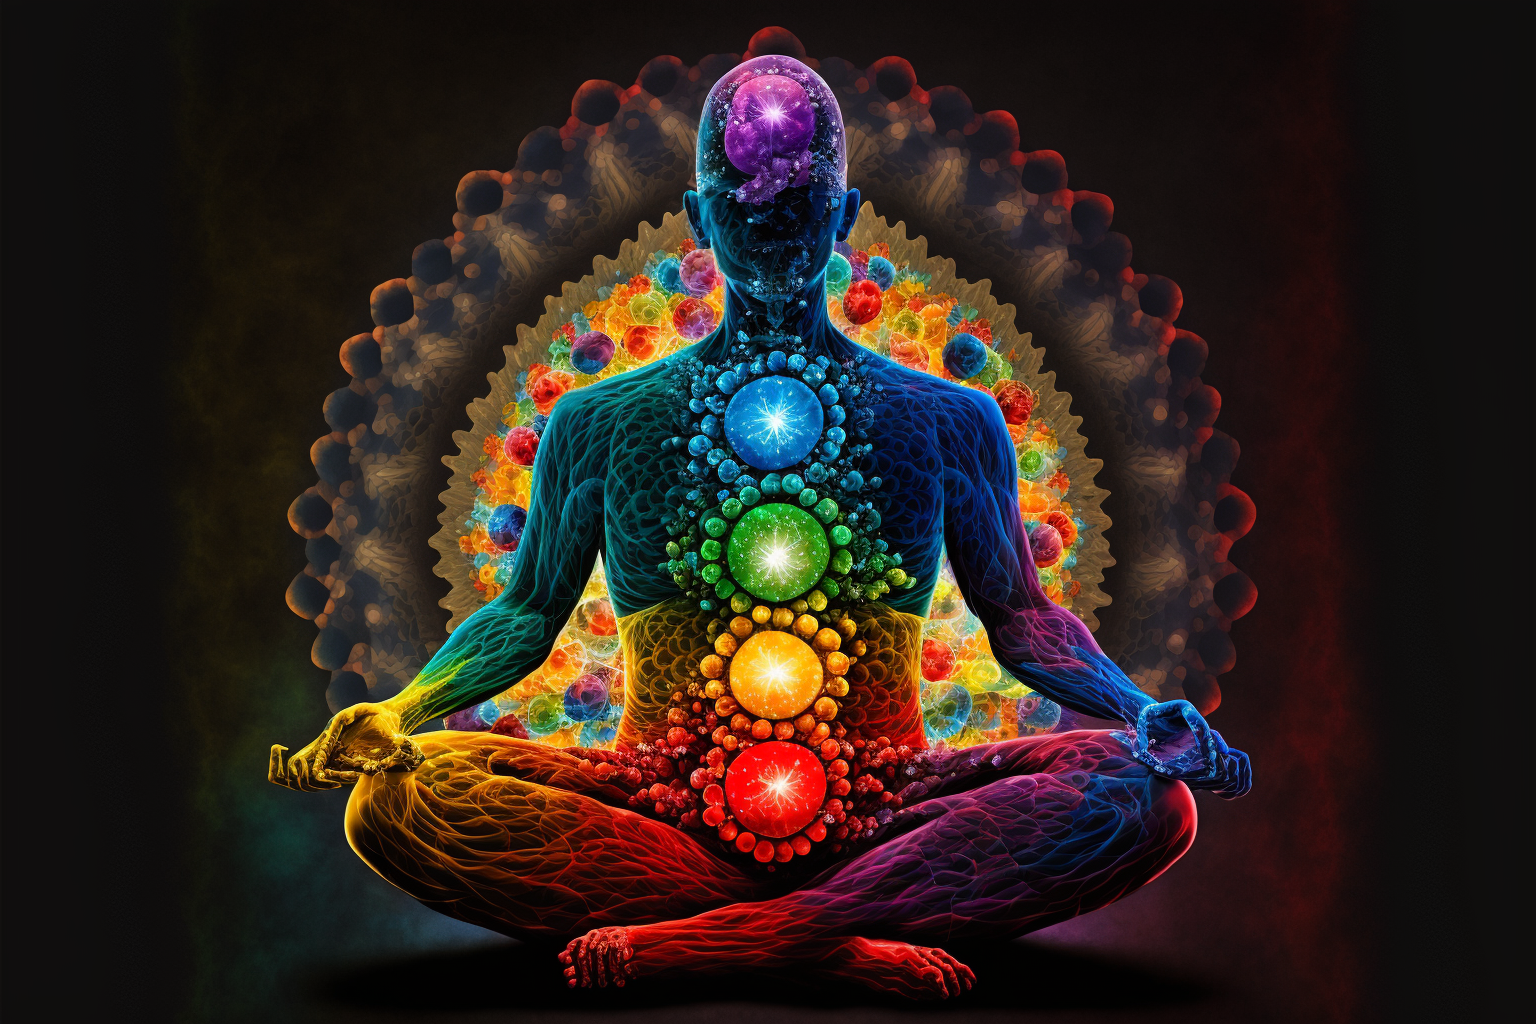 antjuan_energetic_being_sitting_in_lotus_position_while_meditat_47feb4ab-f282-4170-8088-2b2e28f5678f.png